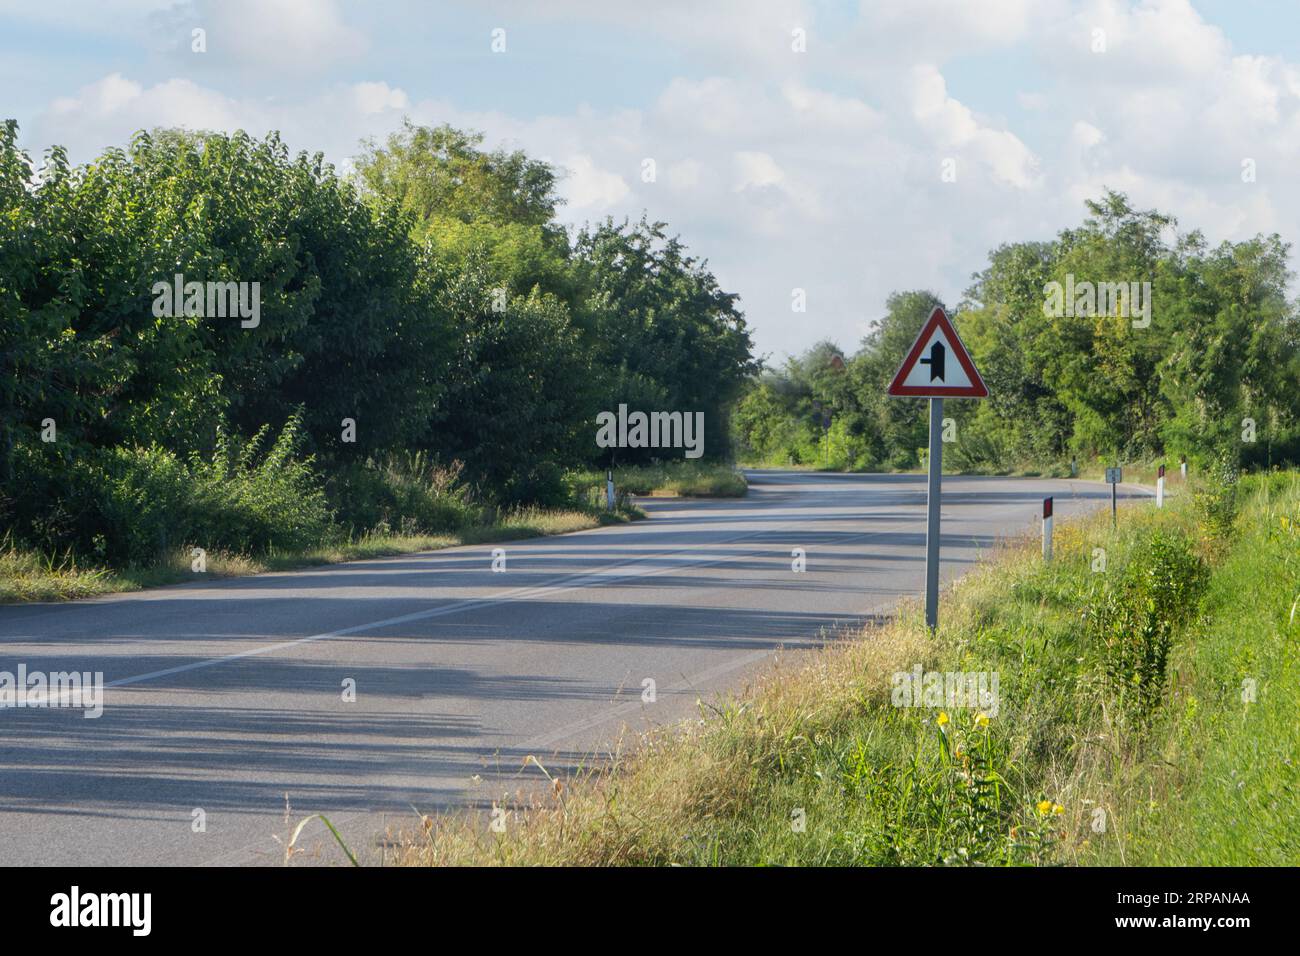 Intersection road sign with right of way on a country road Stock Photo